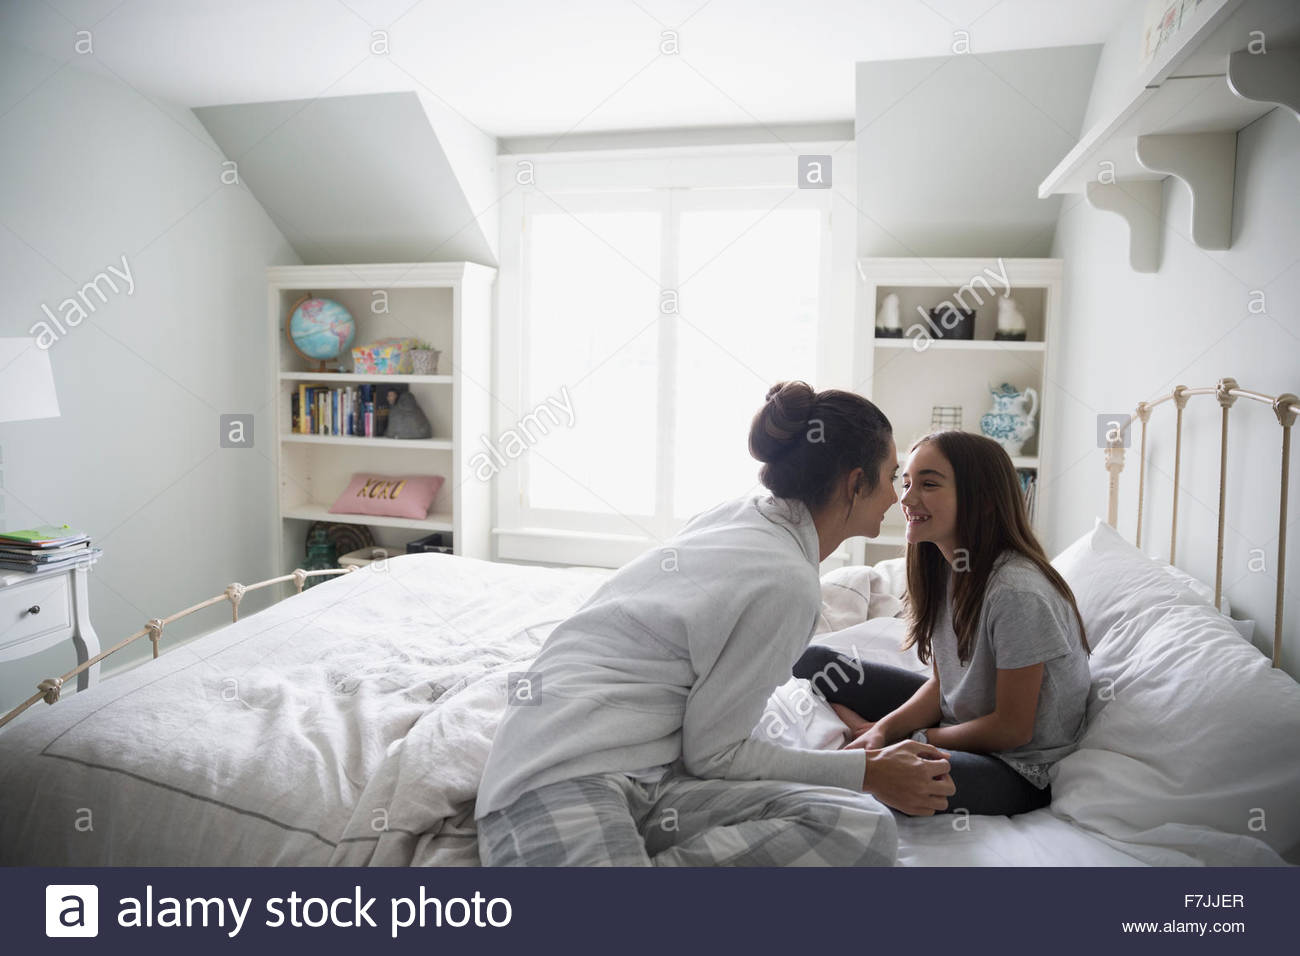 Affectionate mother and daughter rubbing noses on bed Stock Photo